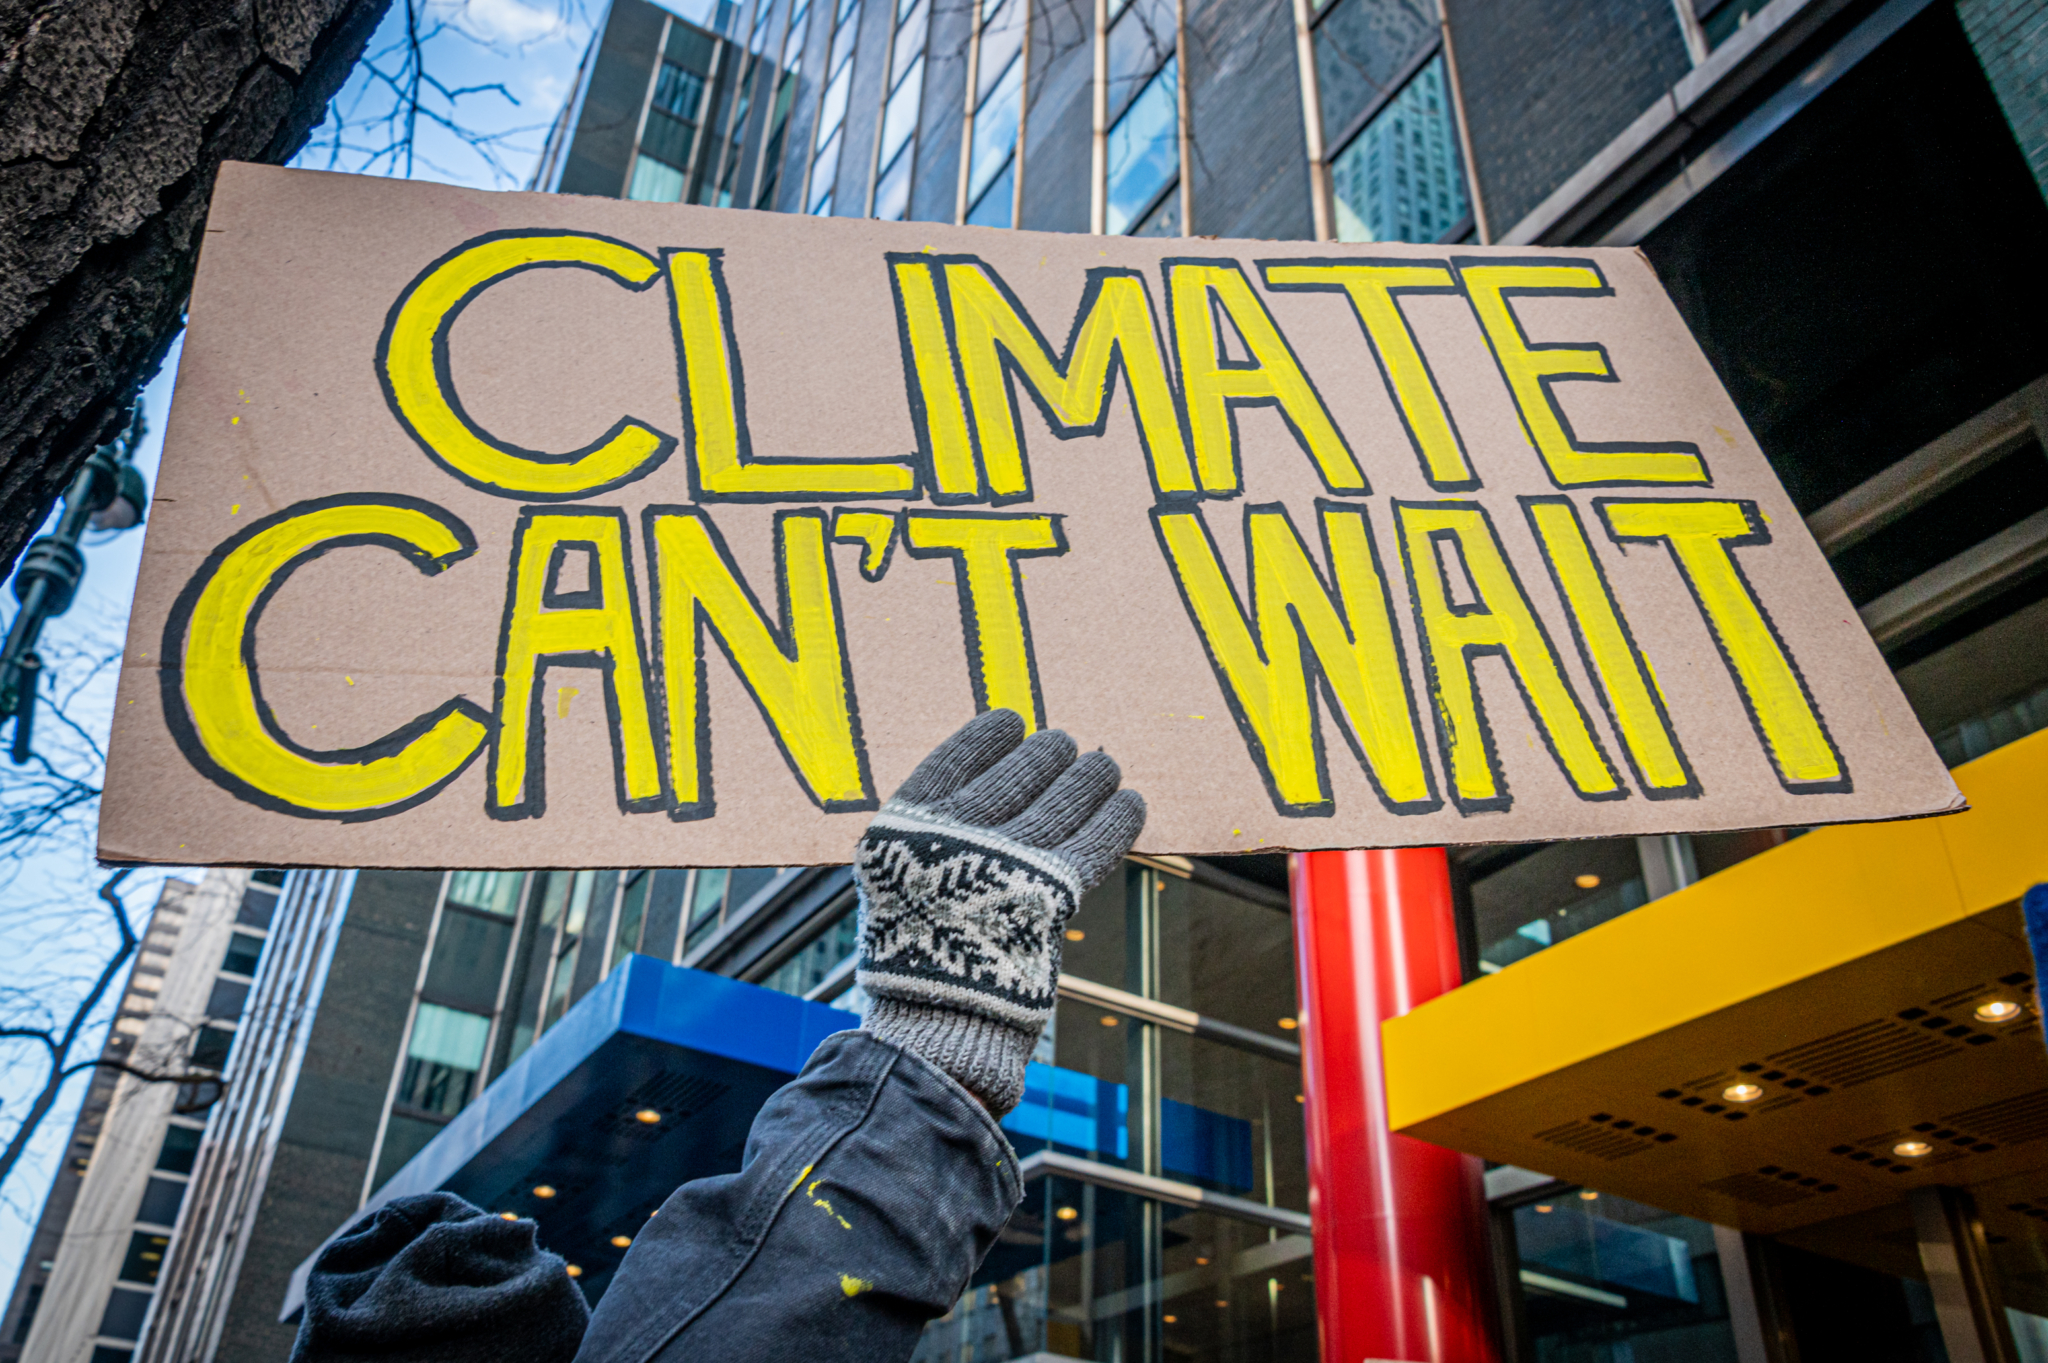 A sign held up by a protester says "CLIMATE CAN'T WAIT"